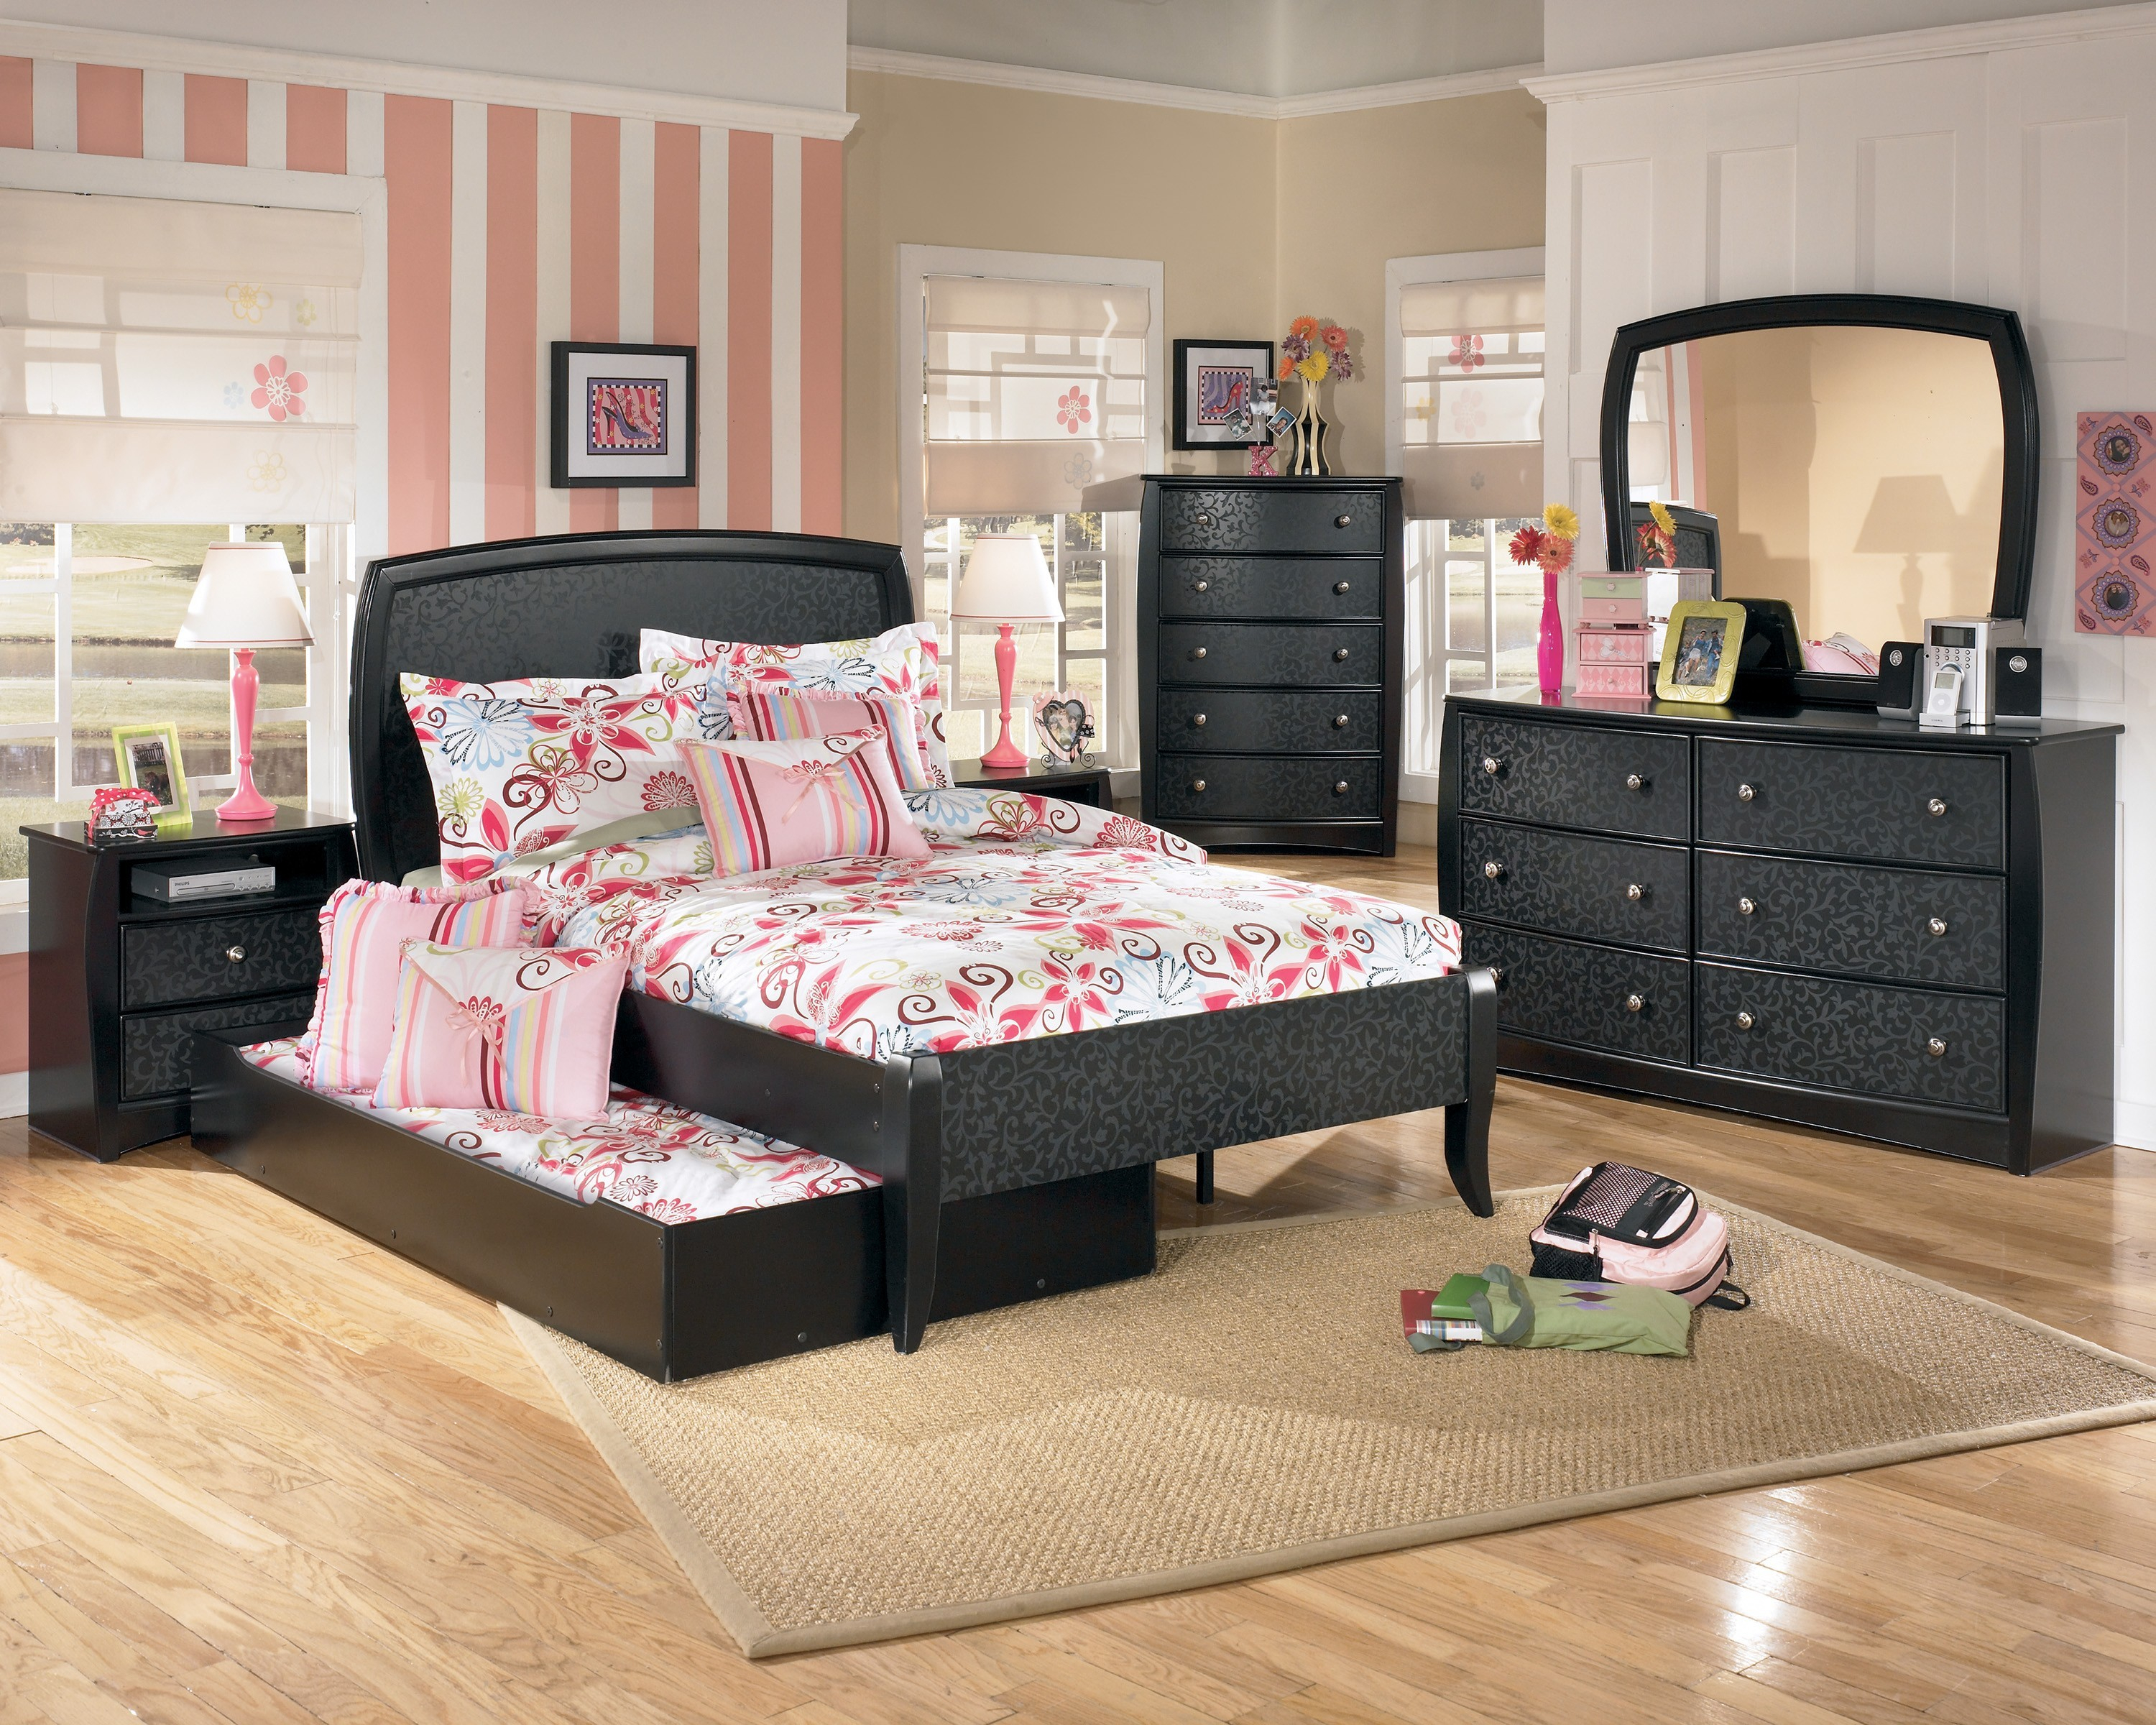 Astonishing Bedroom Furniture For Guys Storage And Full Boy with dimensions 3000 X 2400